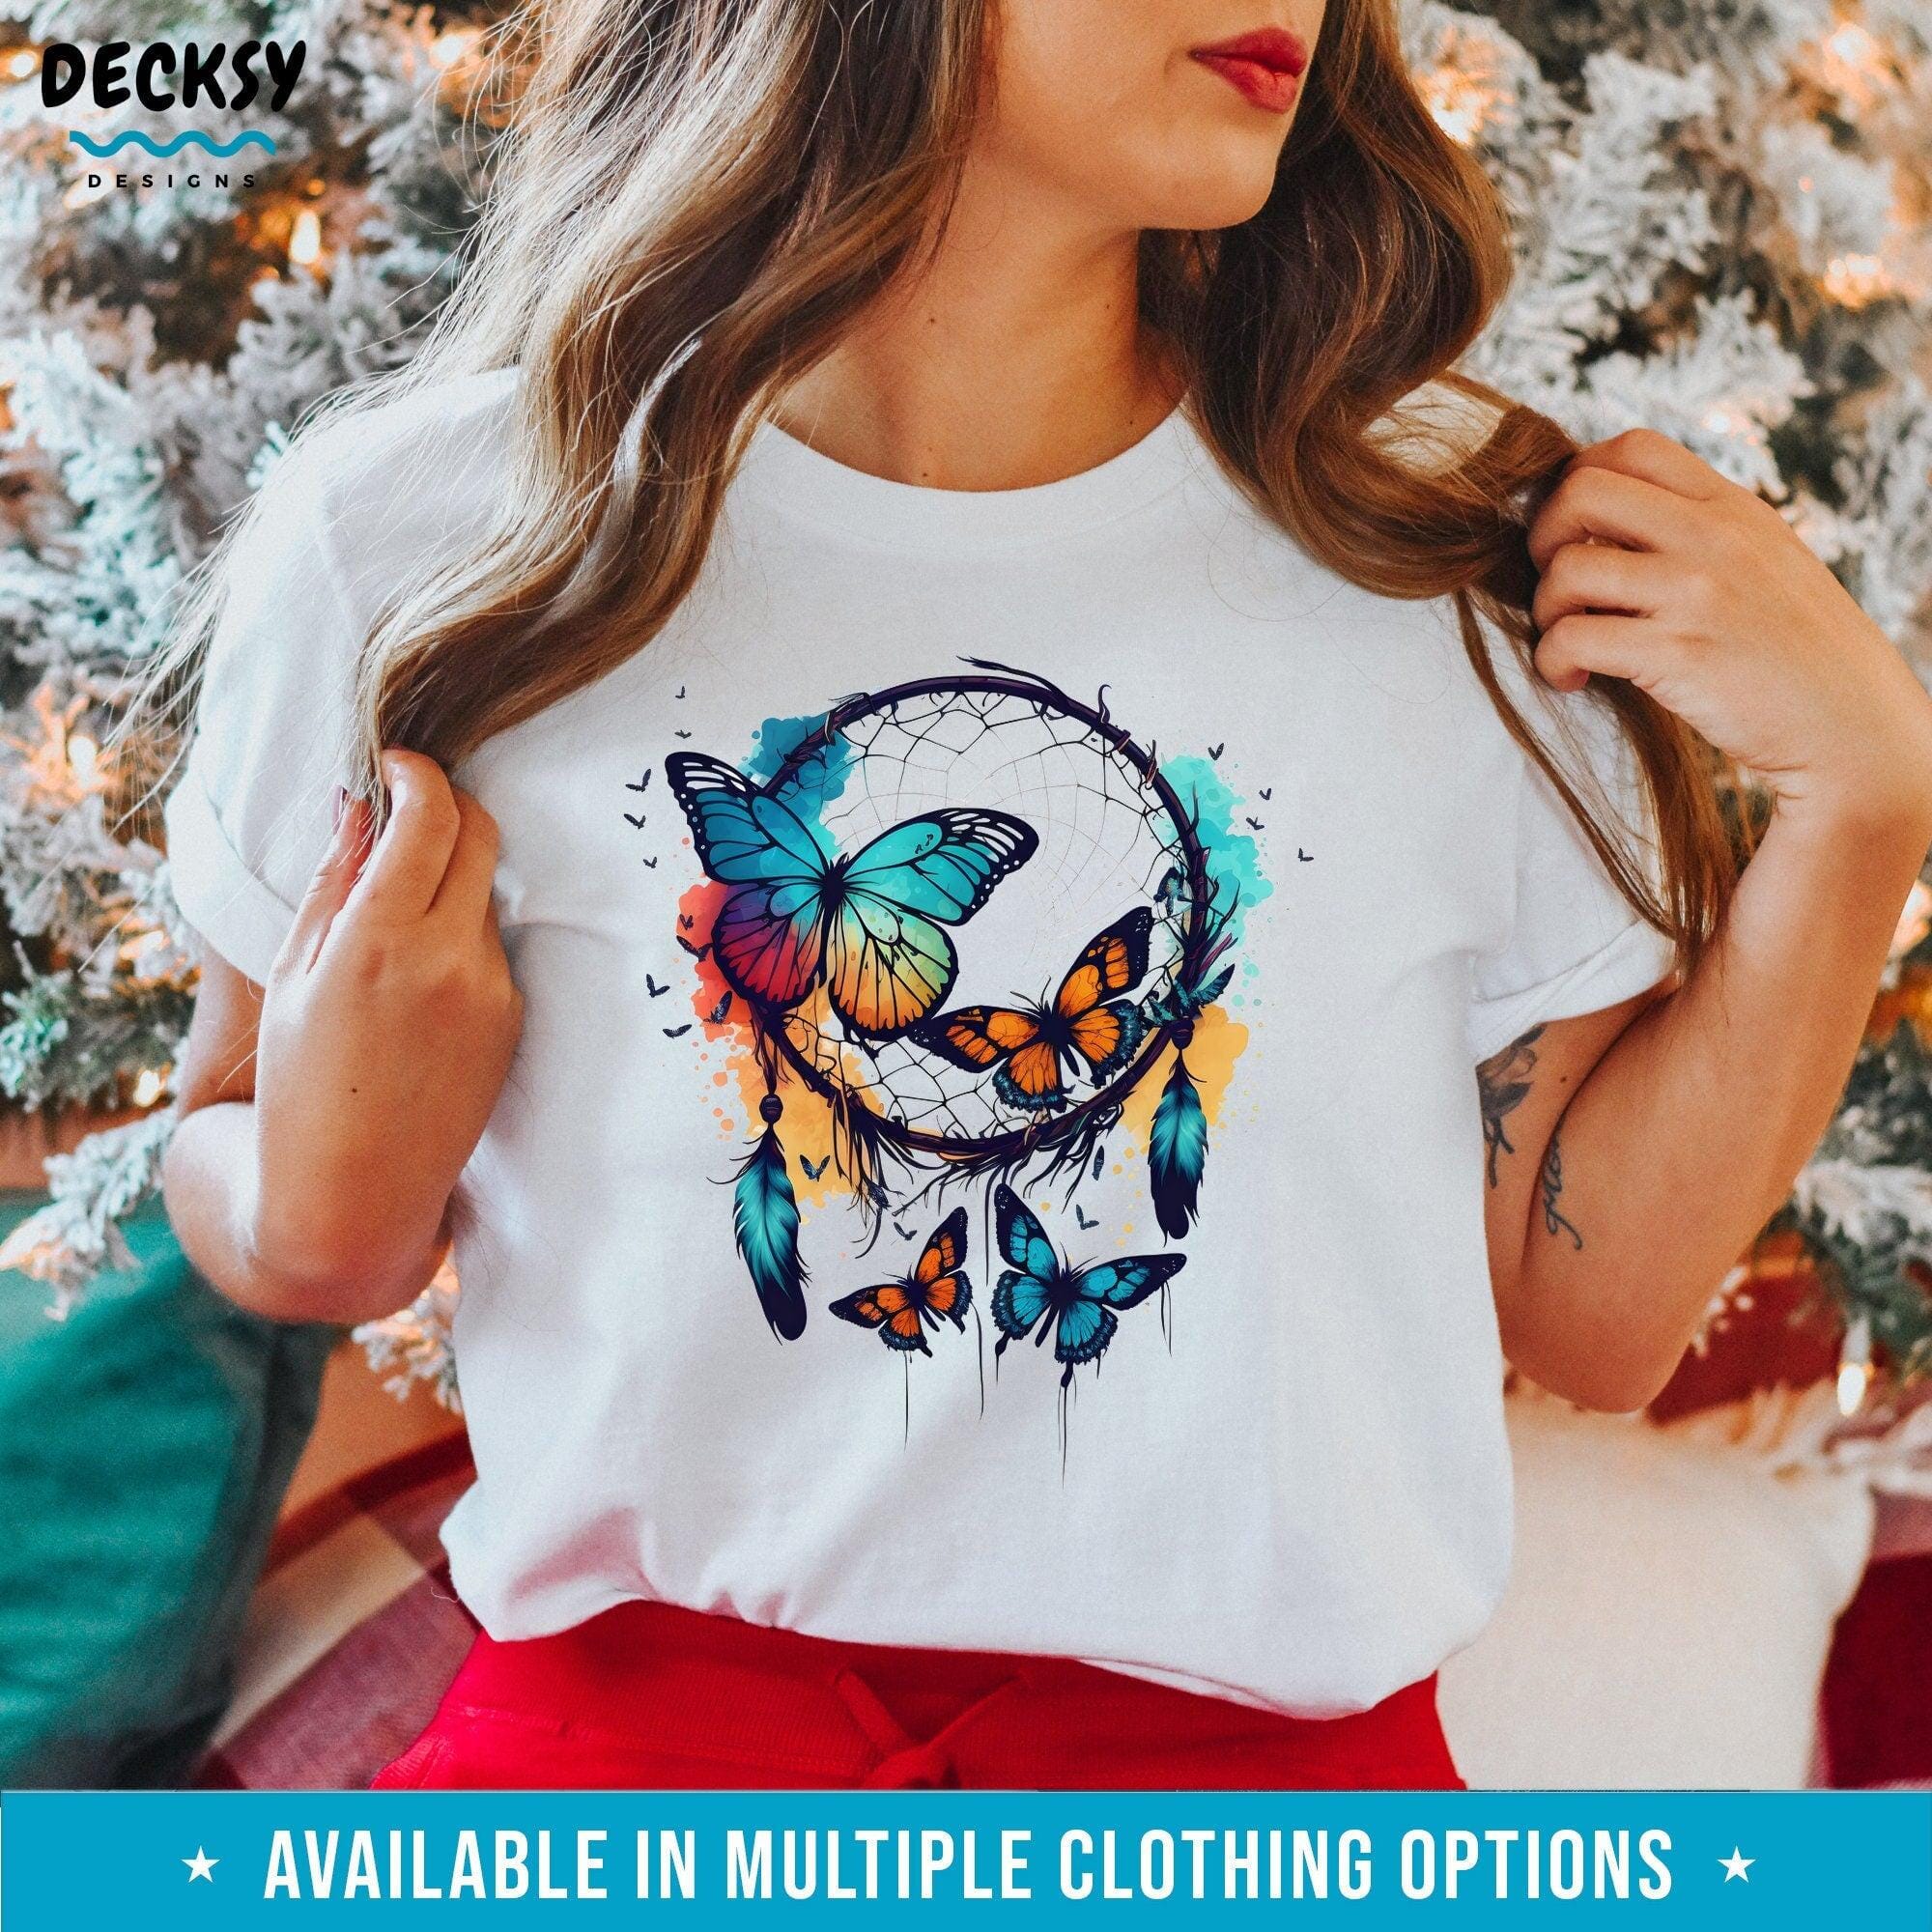 Dreamcatcher Shirt, Butterfly Tshirt Gift-Clothing:Gender-Neutral Adult Clothing:Tops & Tees:T-shirts:Graphic Tees-DecksyDesigns